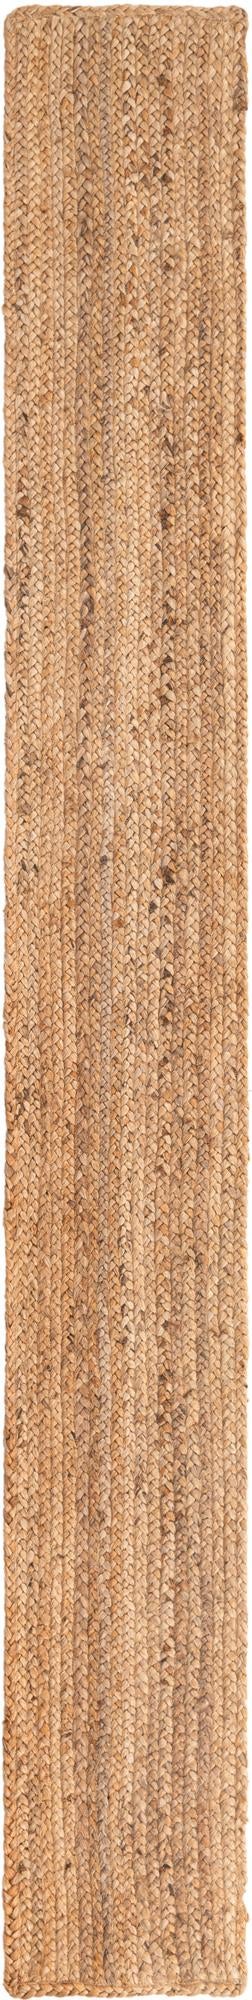 rugpal jewel braided area rug collection